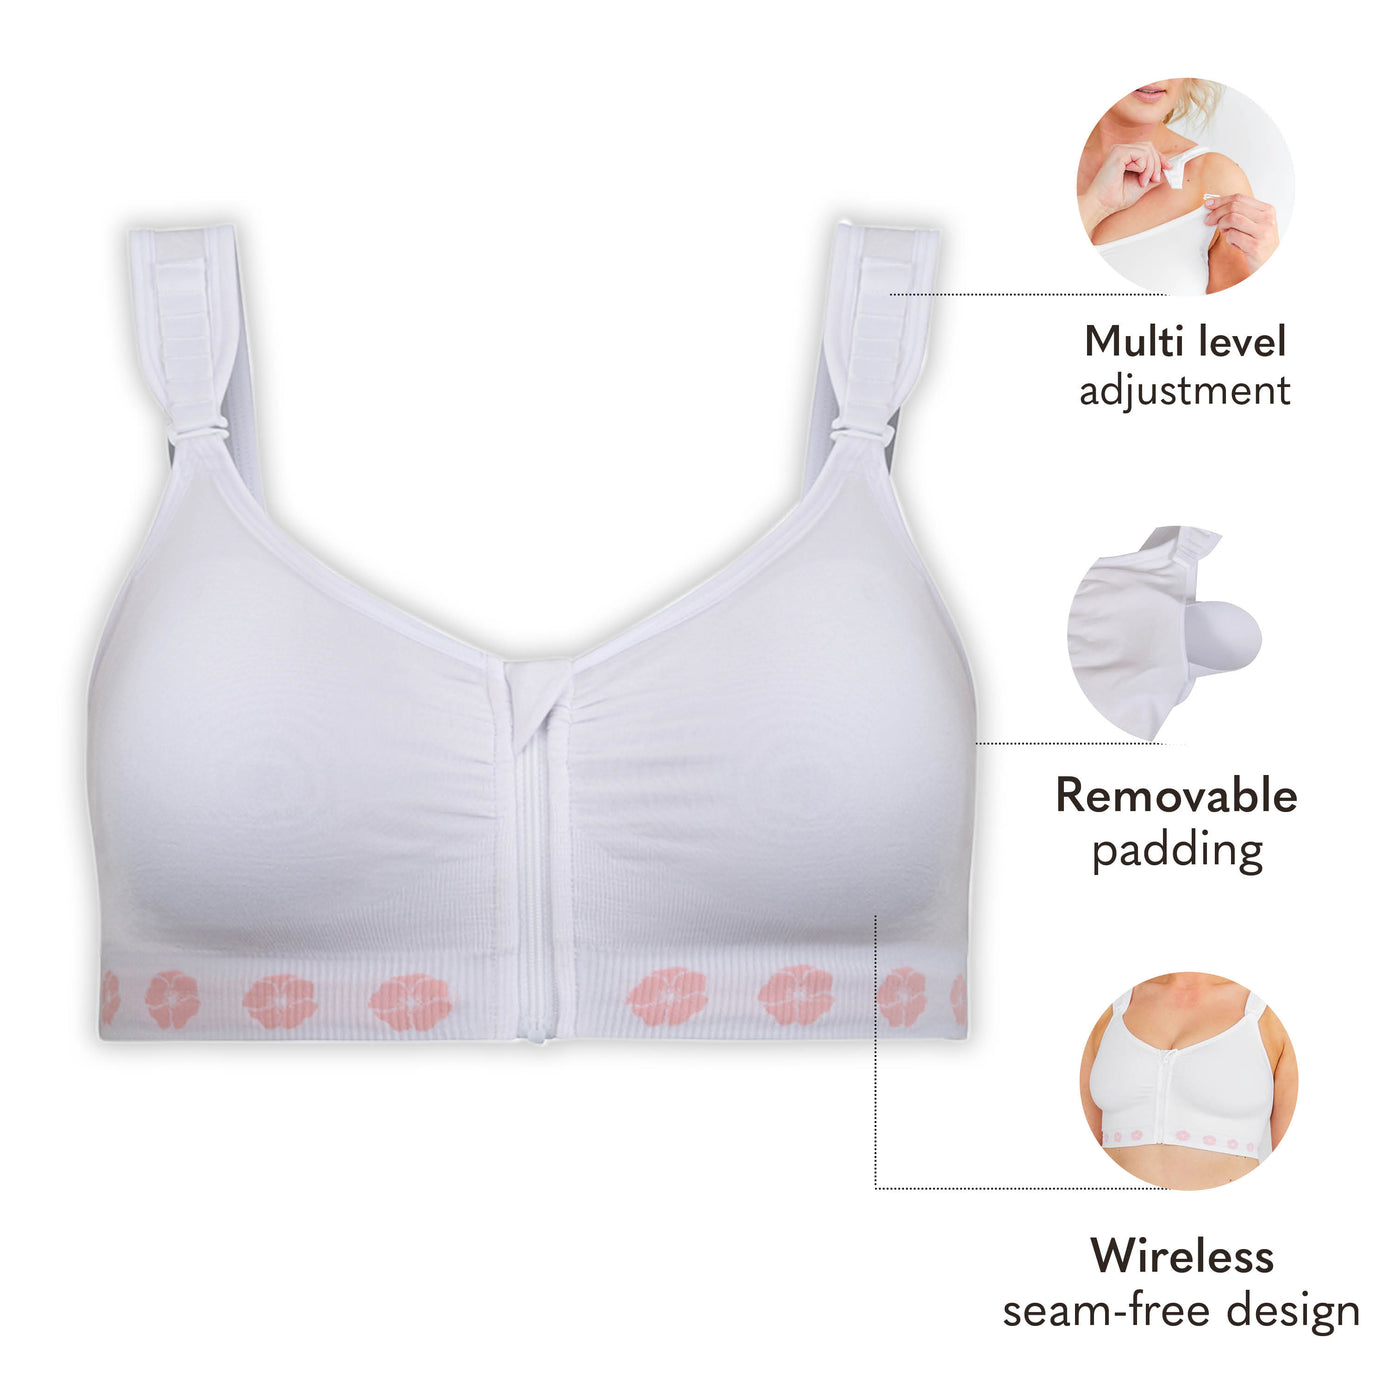 Zip front post surgery bra features including adjustable straps and removable padding